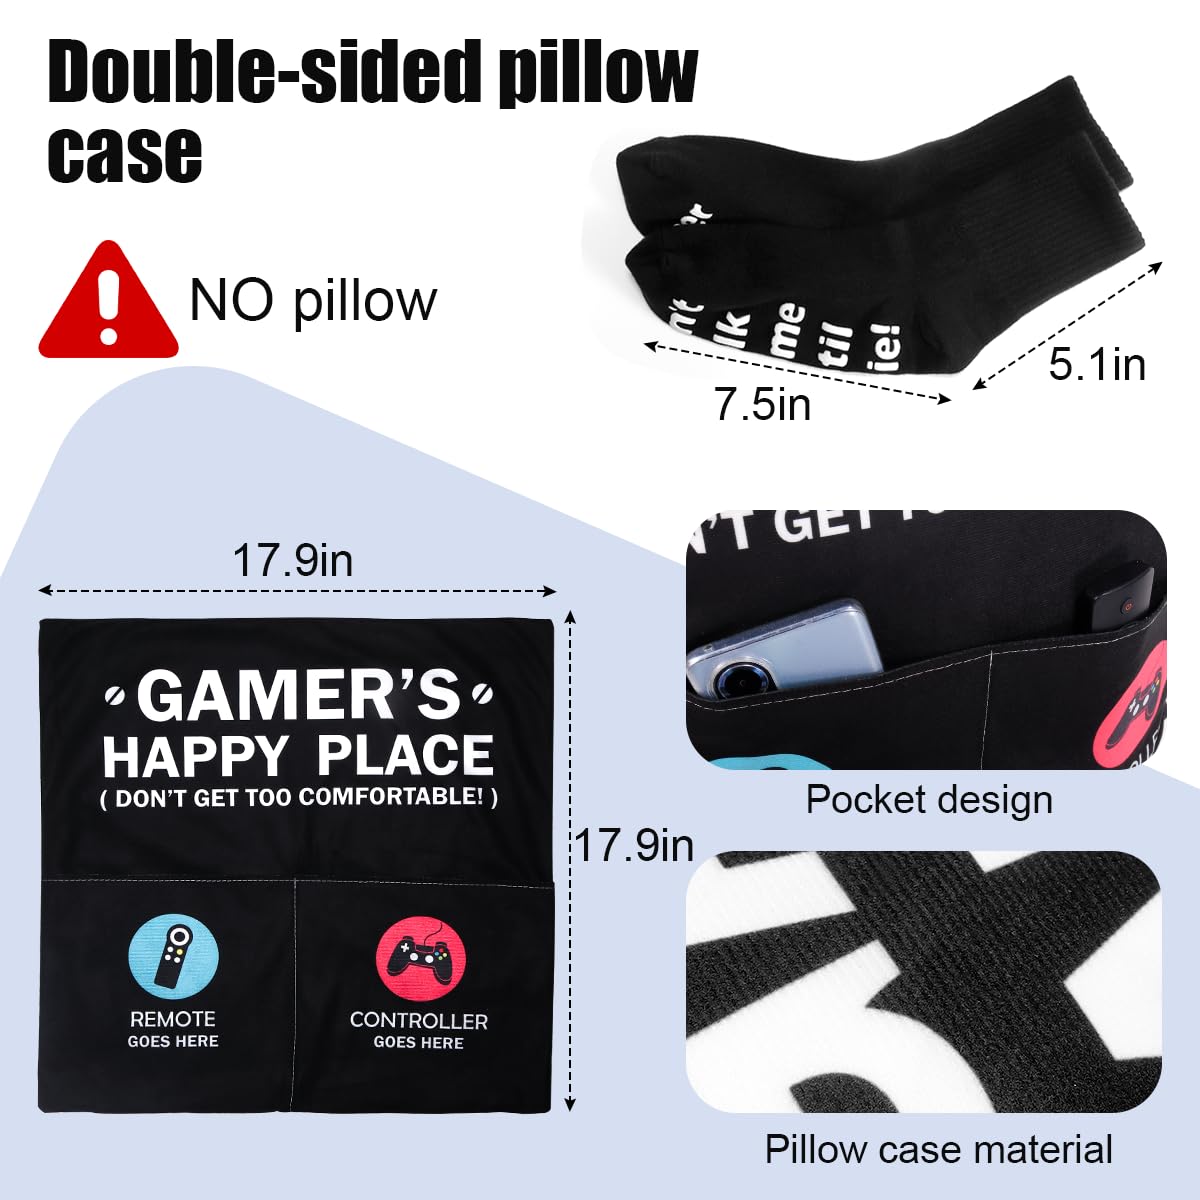 Gamer Gifts, Gaming Gifts for Men, My Gamer Gifts Box- Easter Basket Stuffers (Gamer Tumbler+Pillow Cover+ Socks+Stainless Sign) for Men, Him, Teen Boys, Boyfriends, Father, Gamers, Video Game Lover - amzGamess